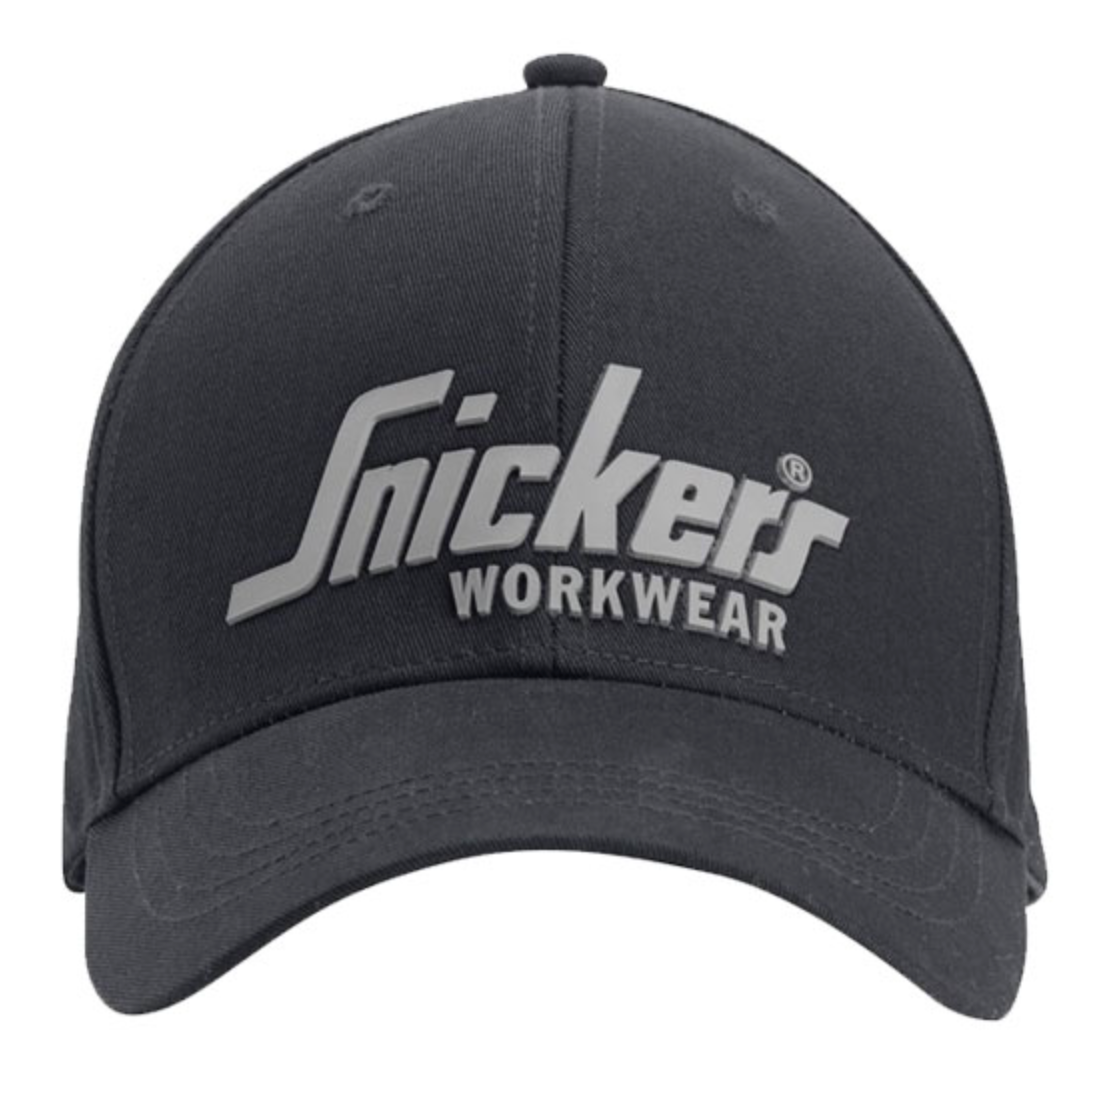 Snickers Workwear products » Compare prices and see offers now